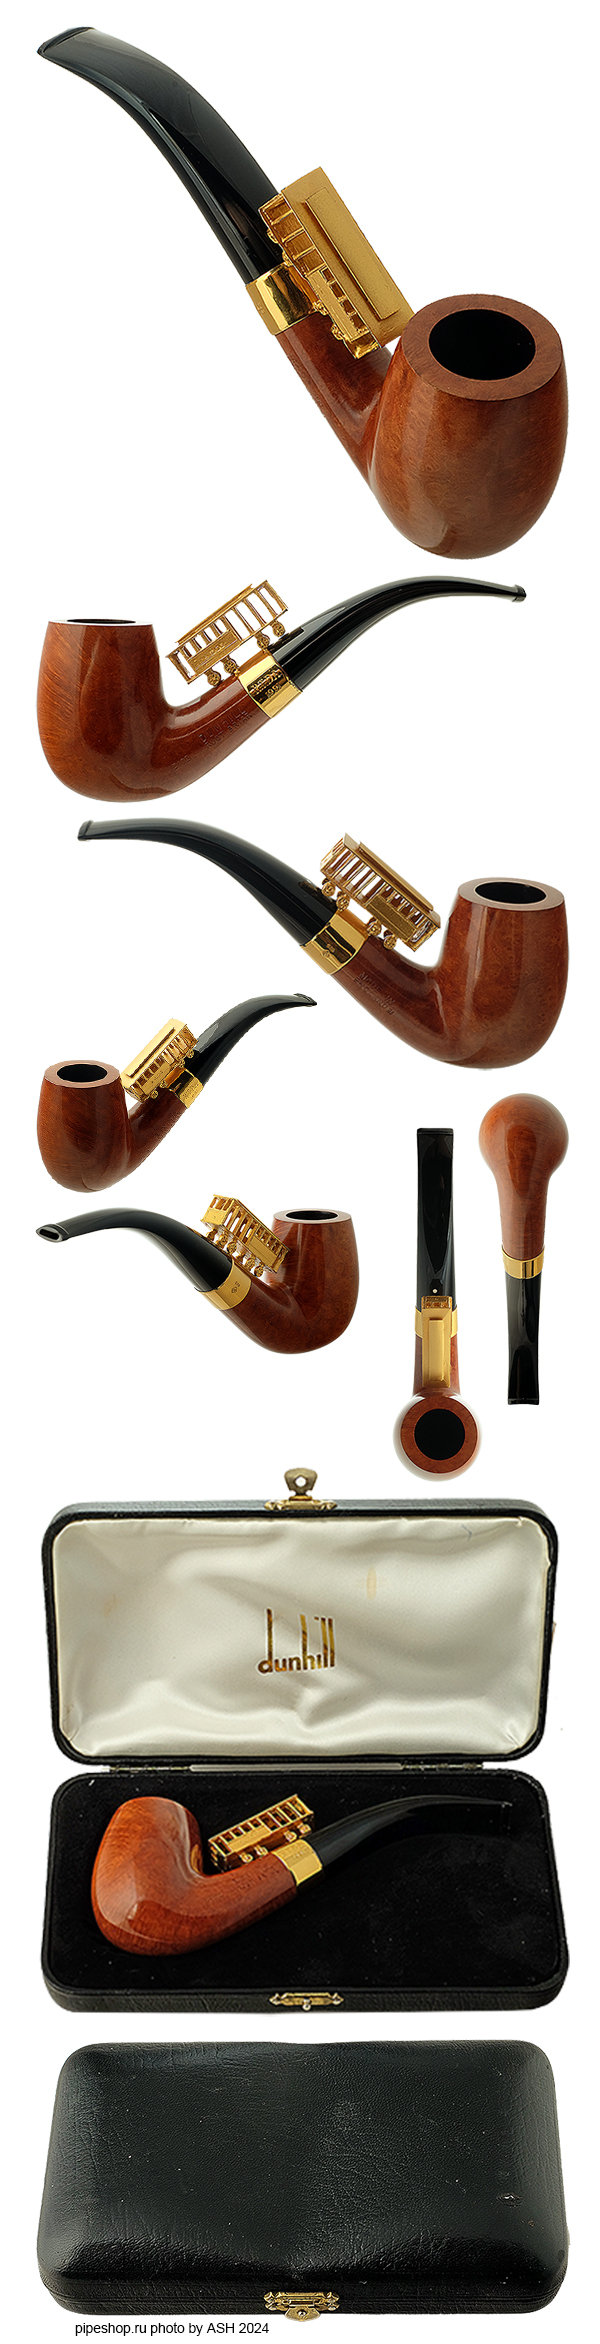   DUNHILL ROOT BRIAR 5102 SMOOTH BENT BILLIARD "RTDA 1991" WITH GOLD PLATED SILVER AND CASE ESTATE NEW UNSMOKED 